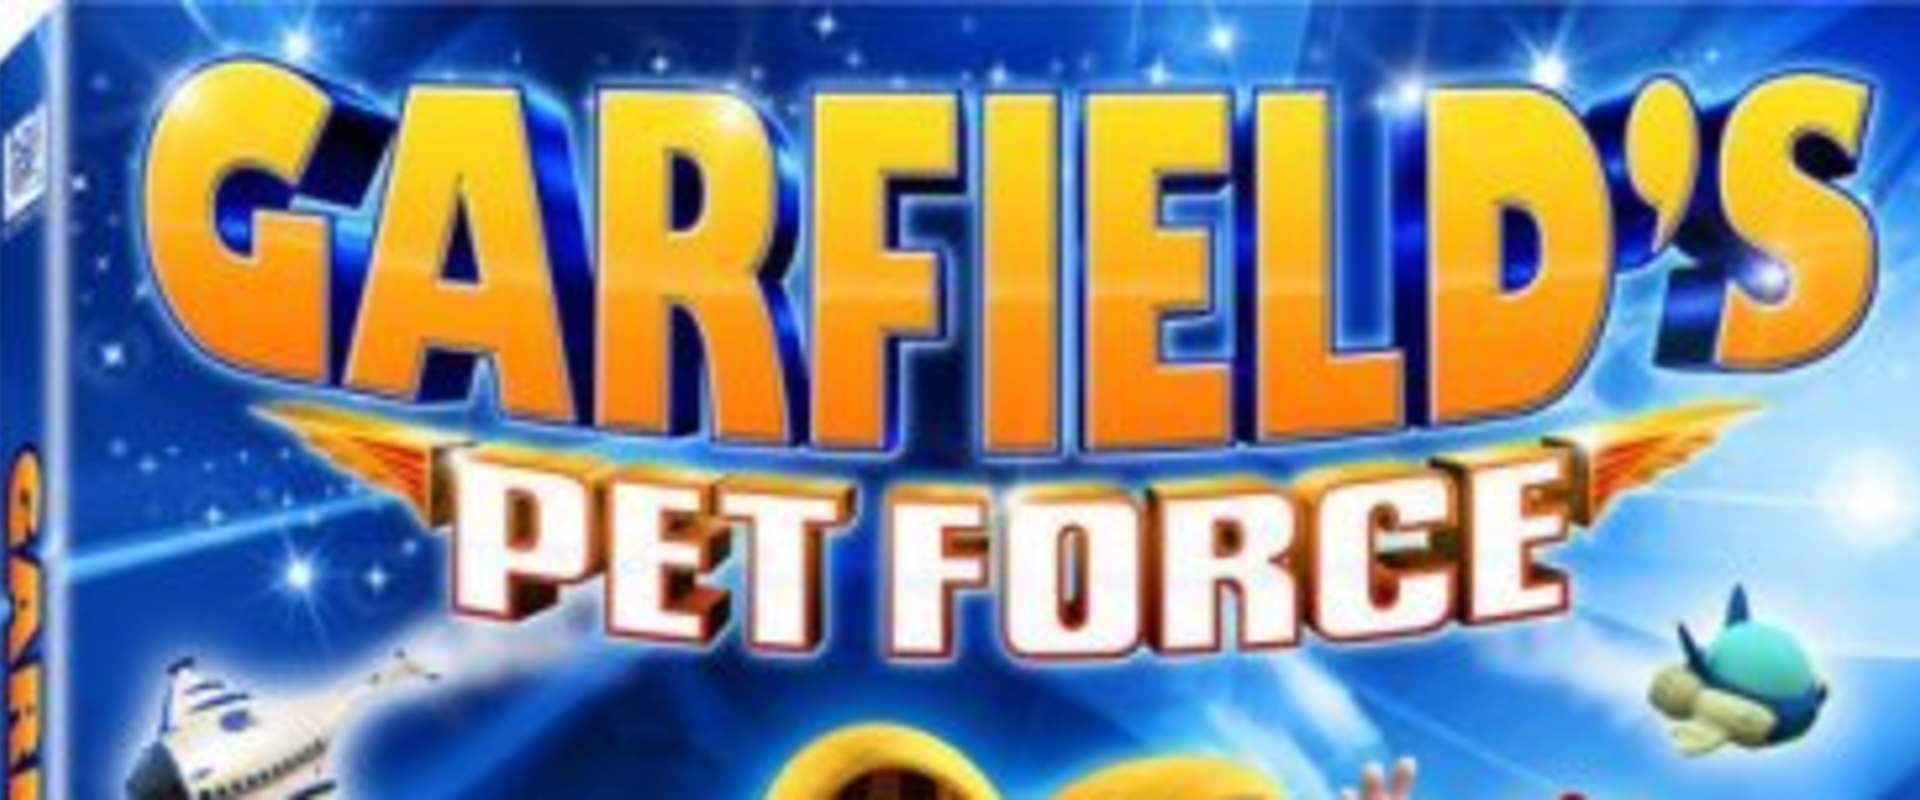 Garfield's Pet Force background 1